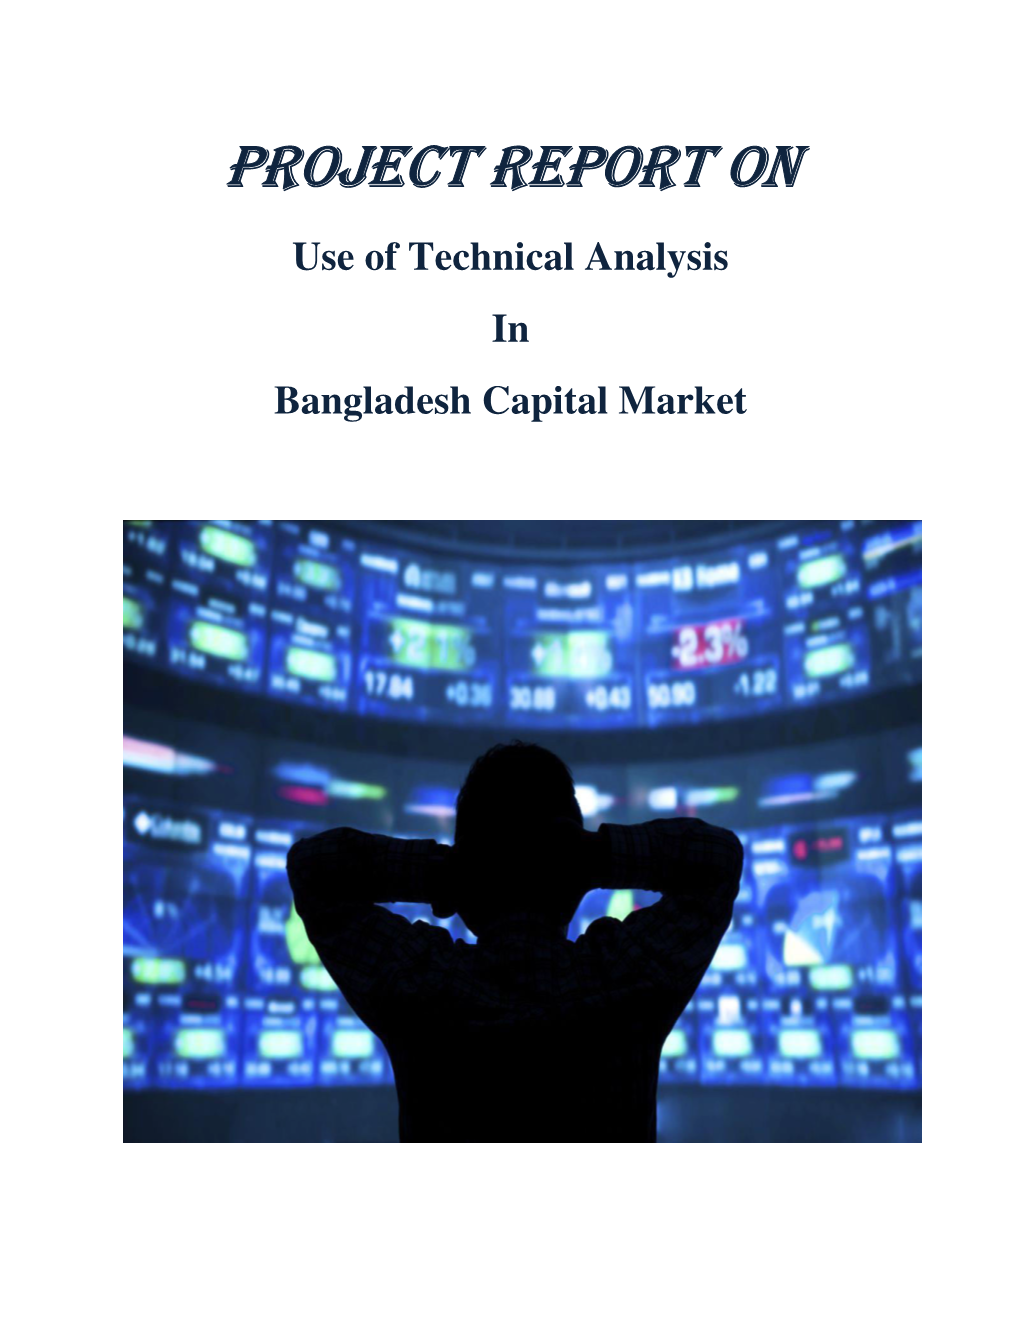 Use of Technical Analysis in Bangladesh Capital Market-1.Pdf